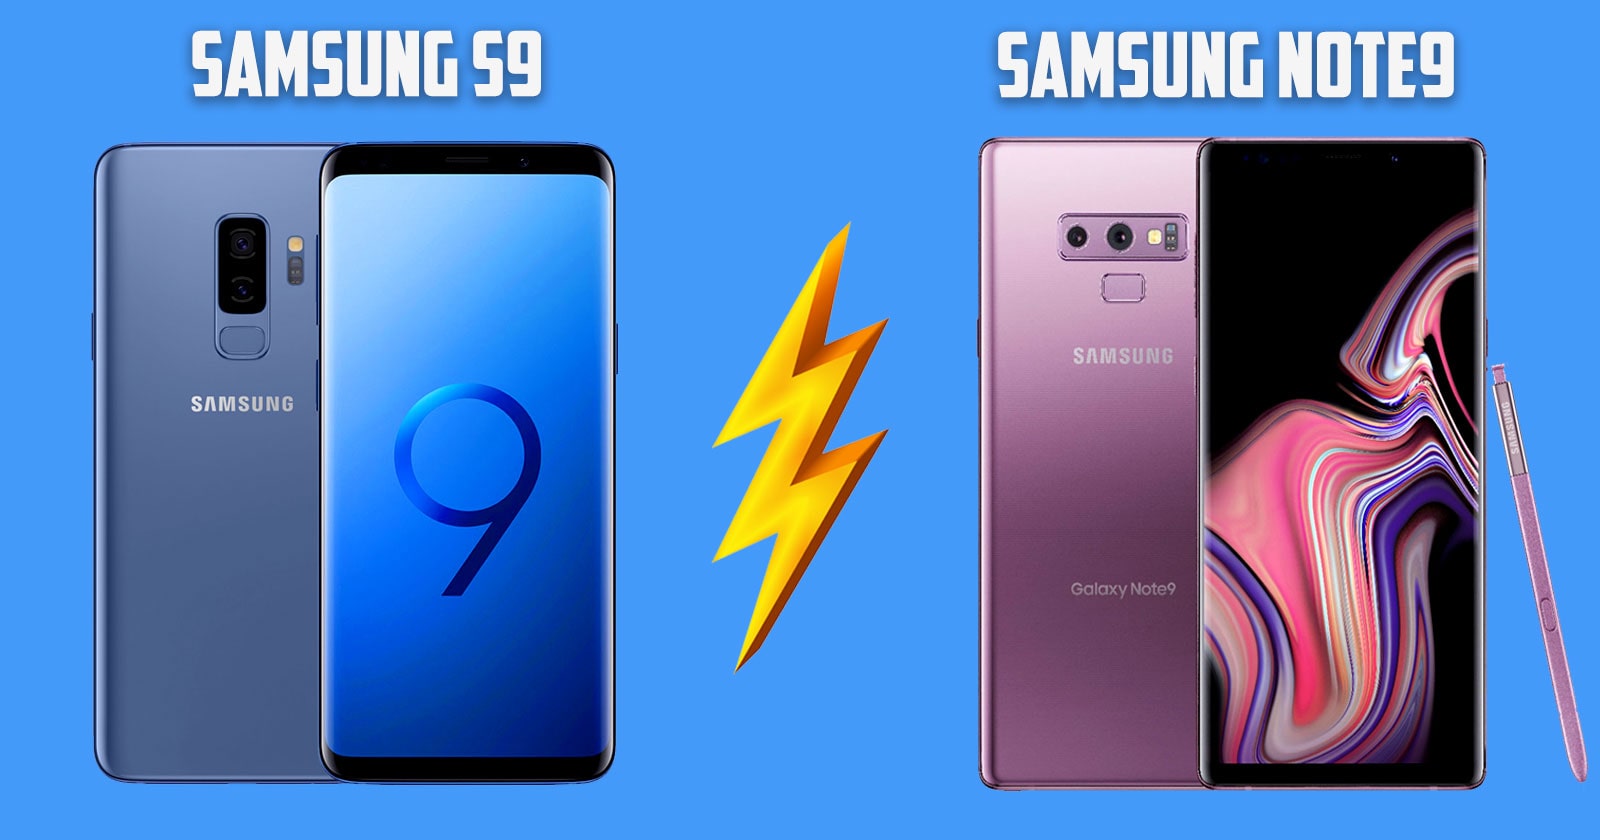 What is the difference between samsung s9 and note 9